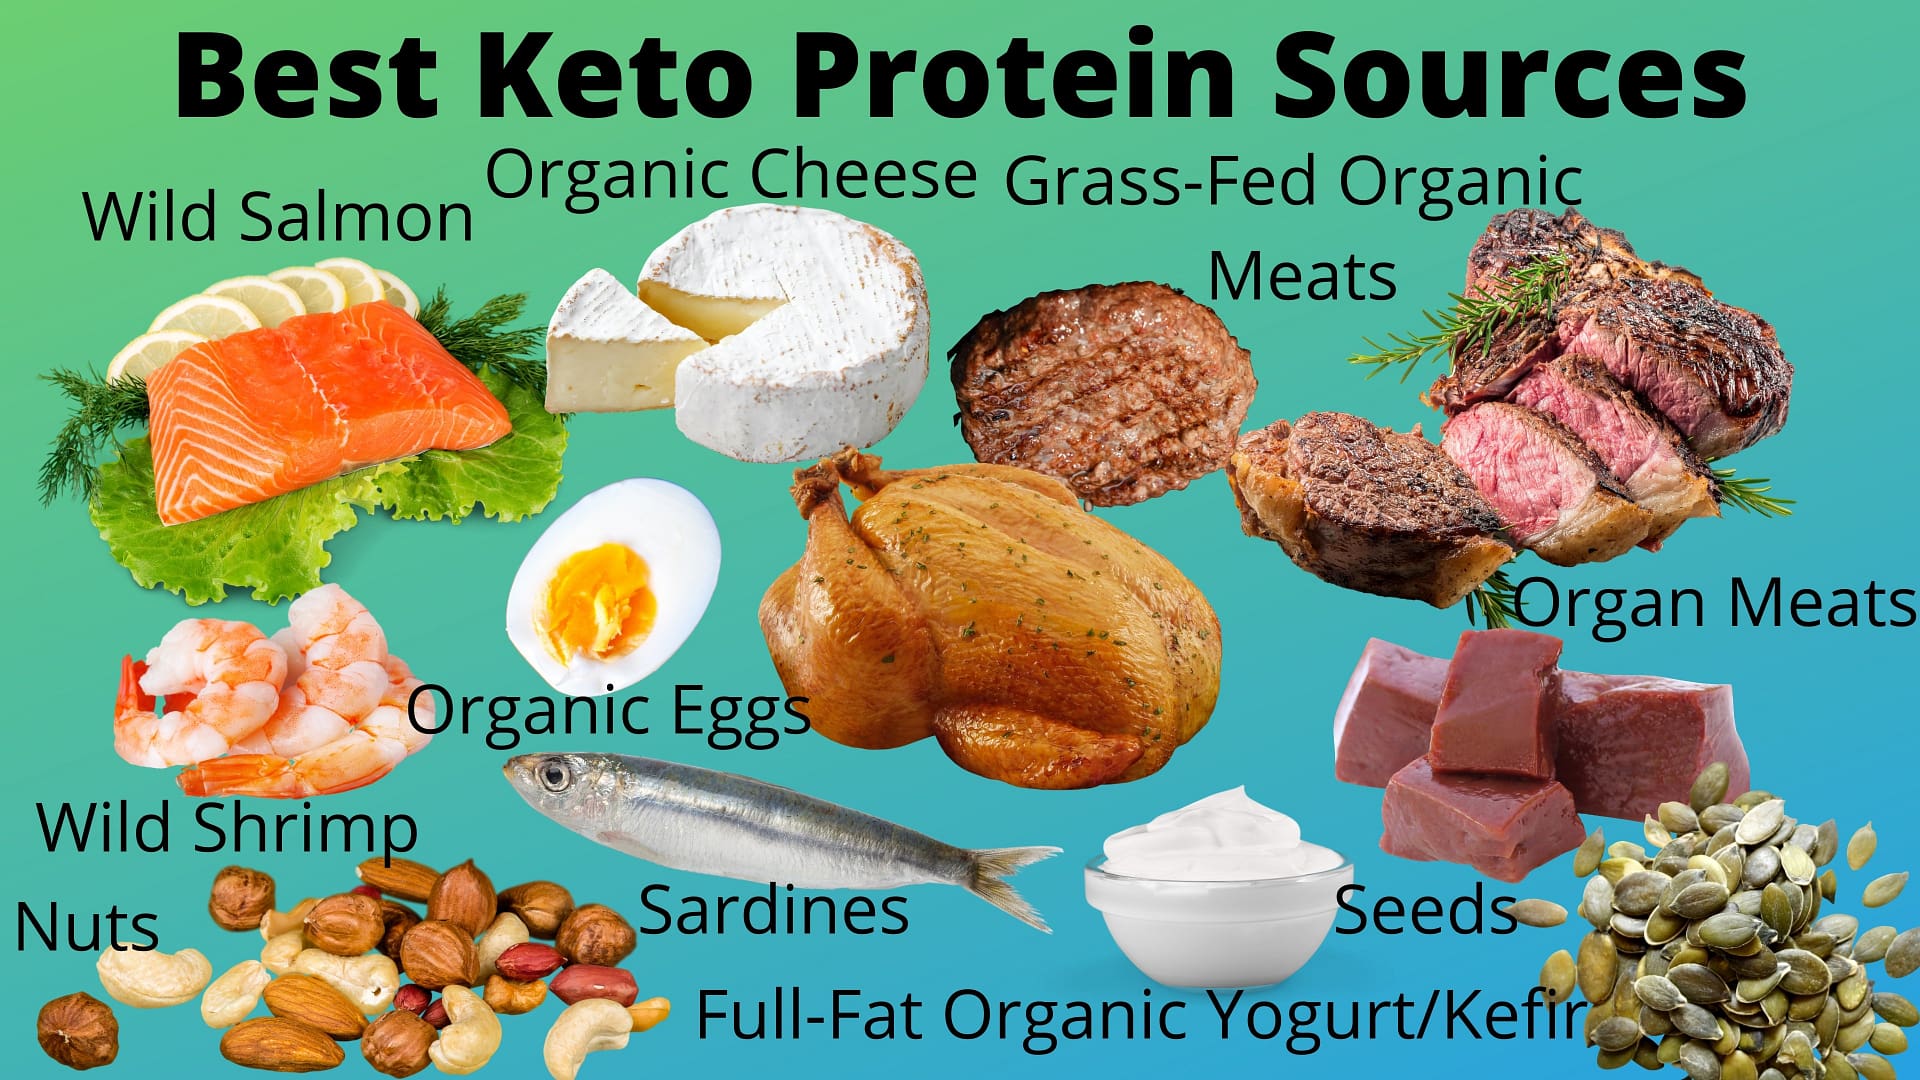 The Best Keto Protein Sources.